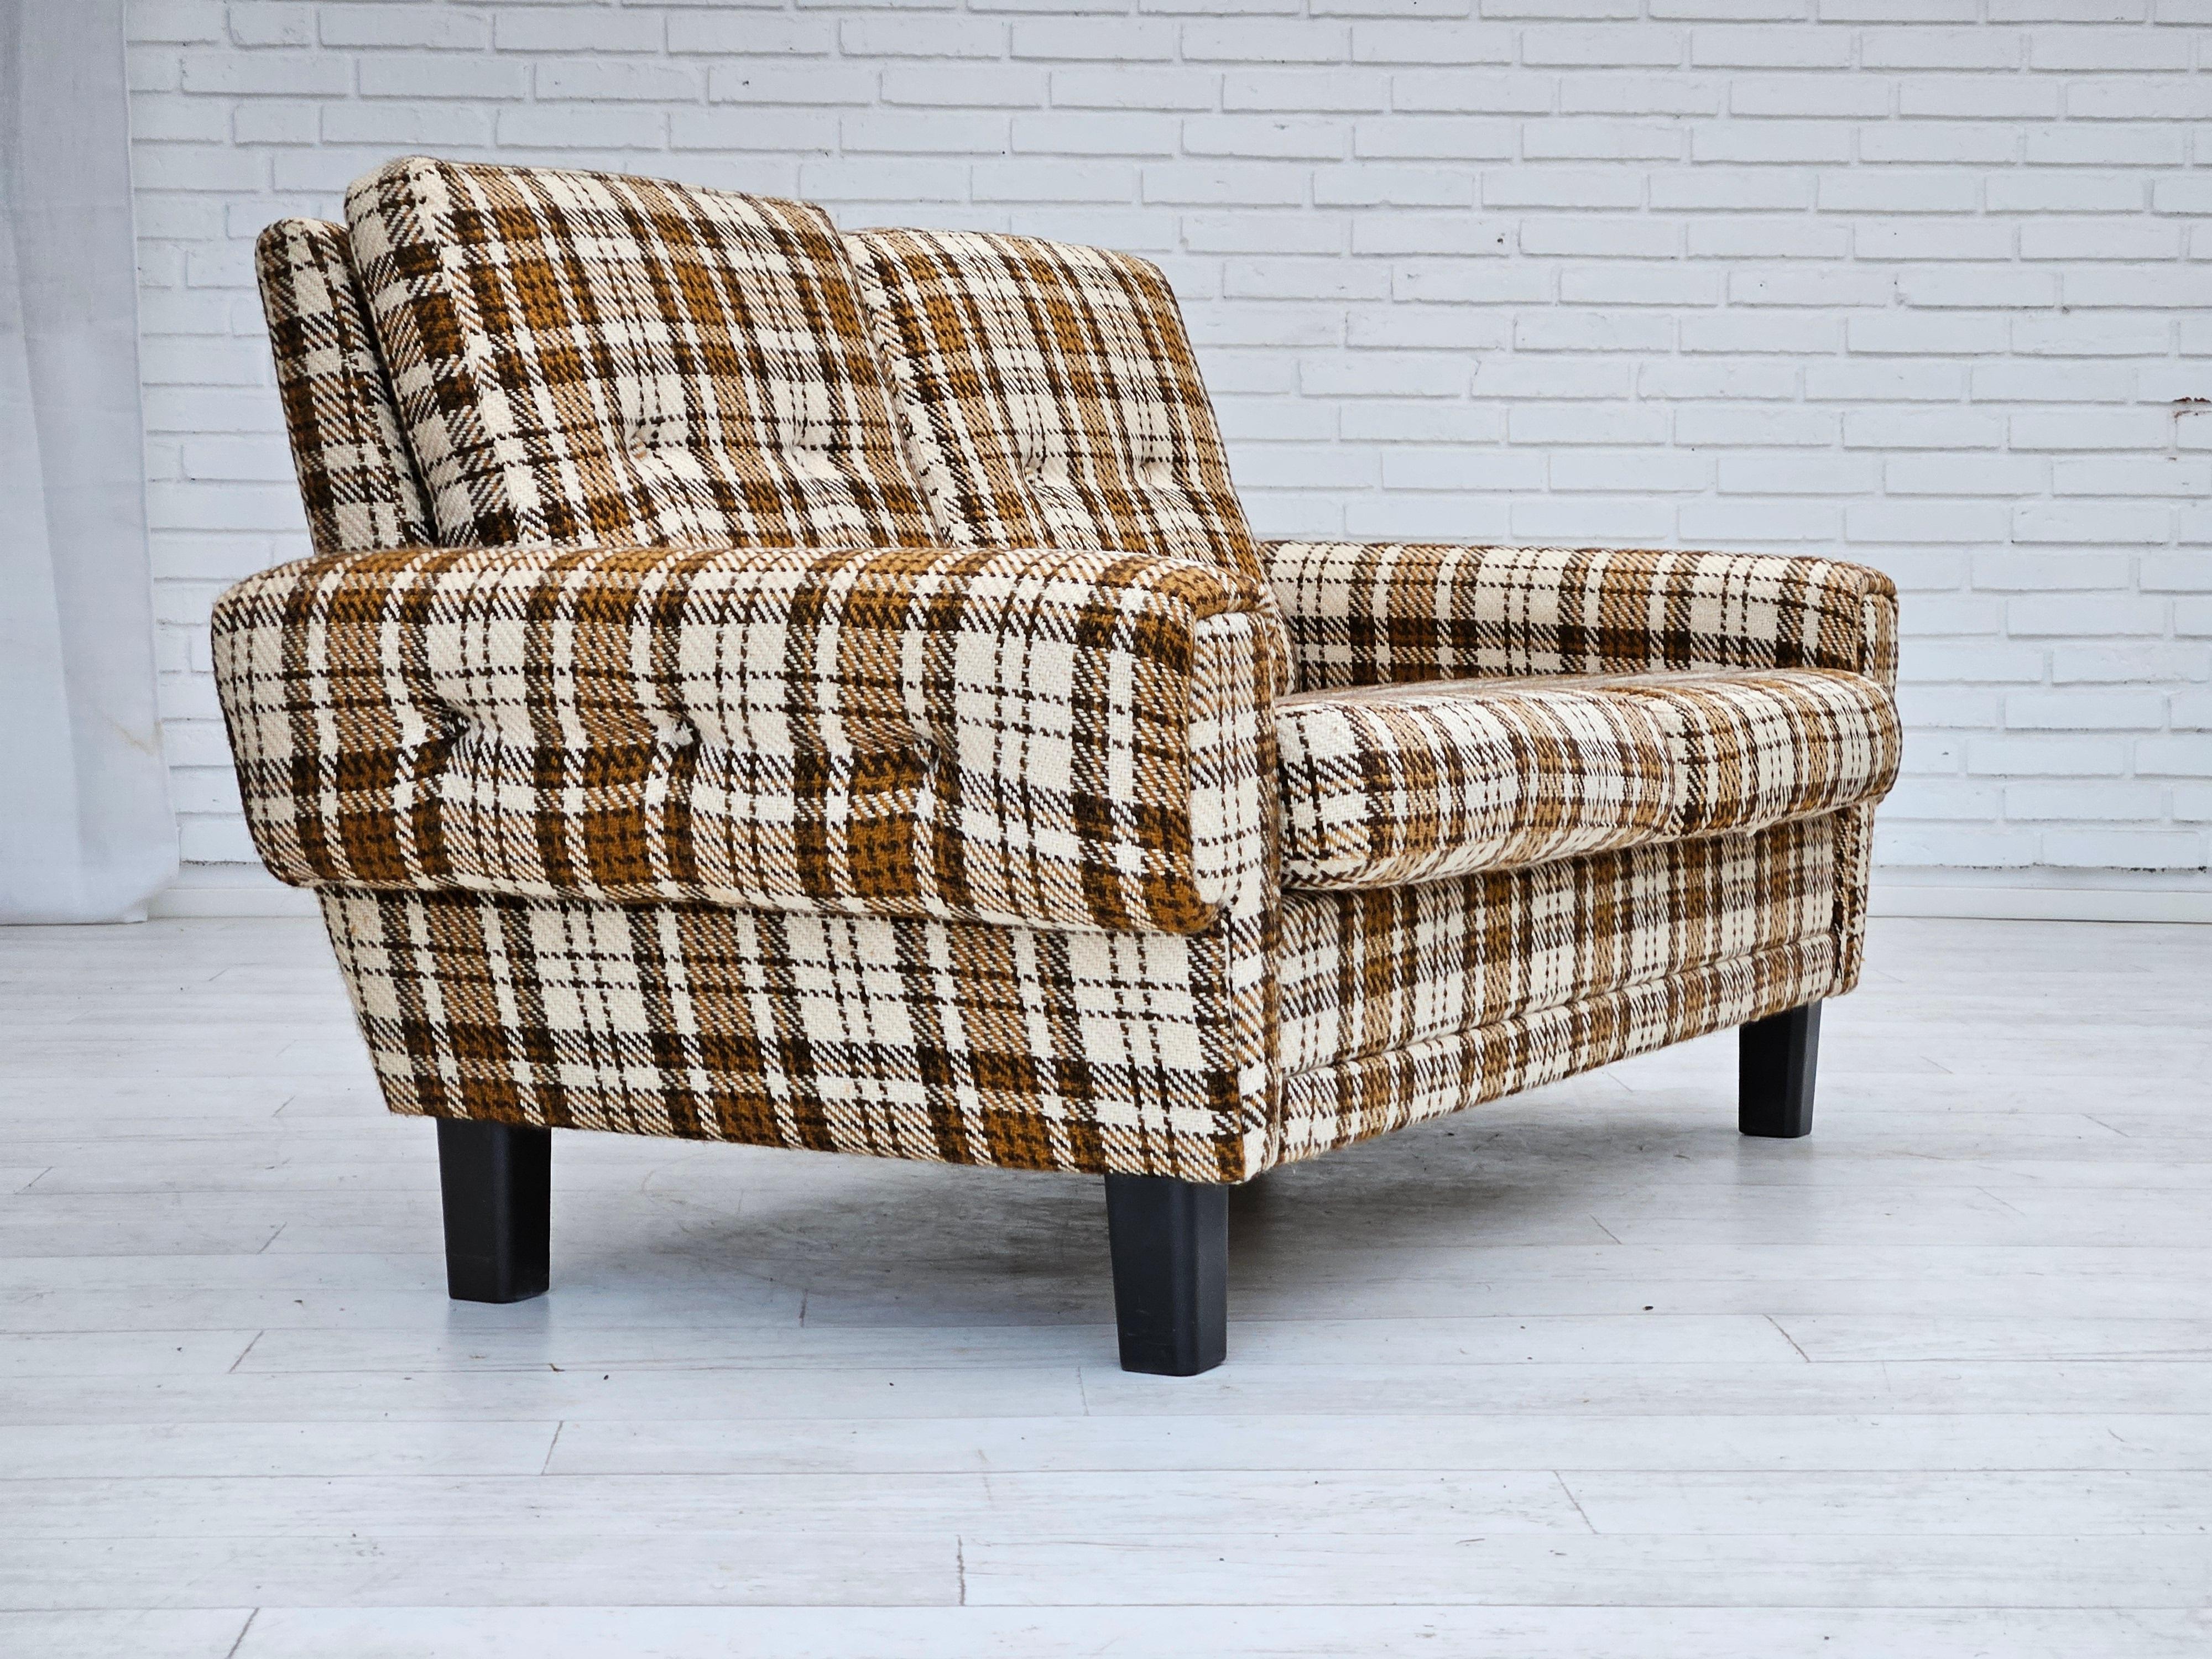 1970s, Danish 2 seater sofa in original very good condition: no smells and no stains. Furniture wool fabric, removable cushions, brown plastic legs. Manufactured by Danish furniture manufacturer in about 1970-75.